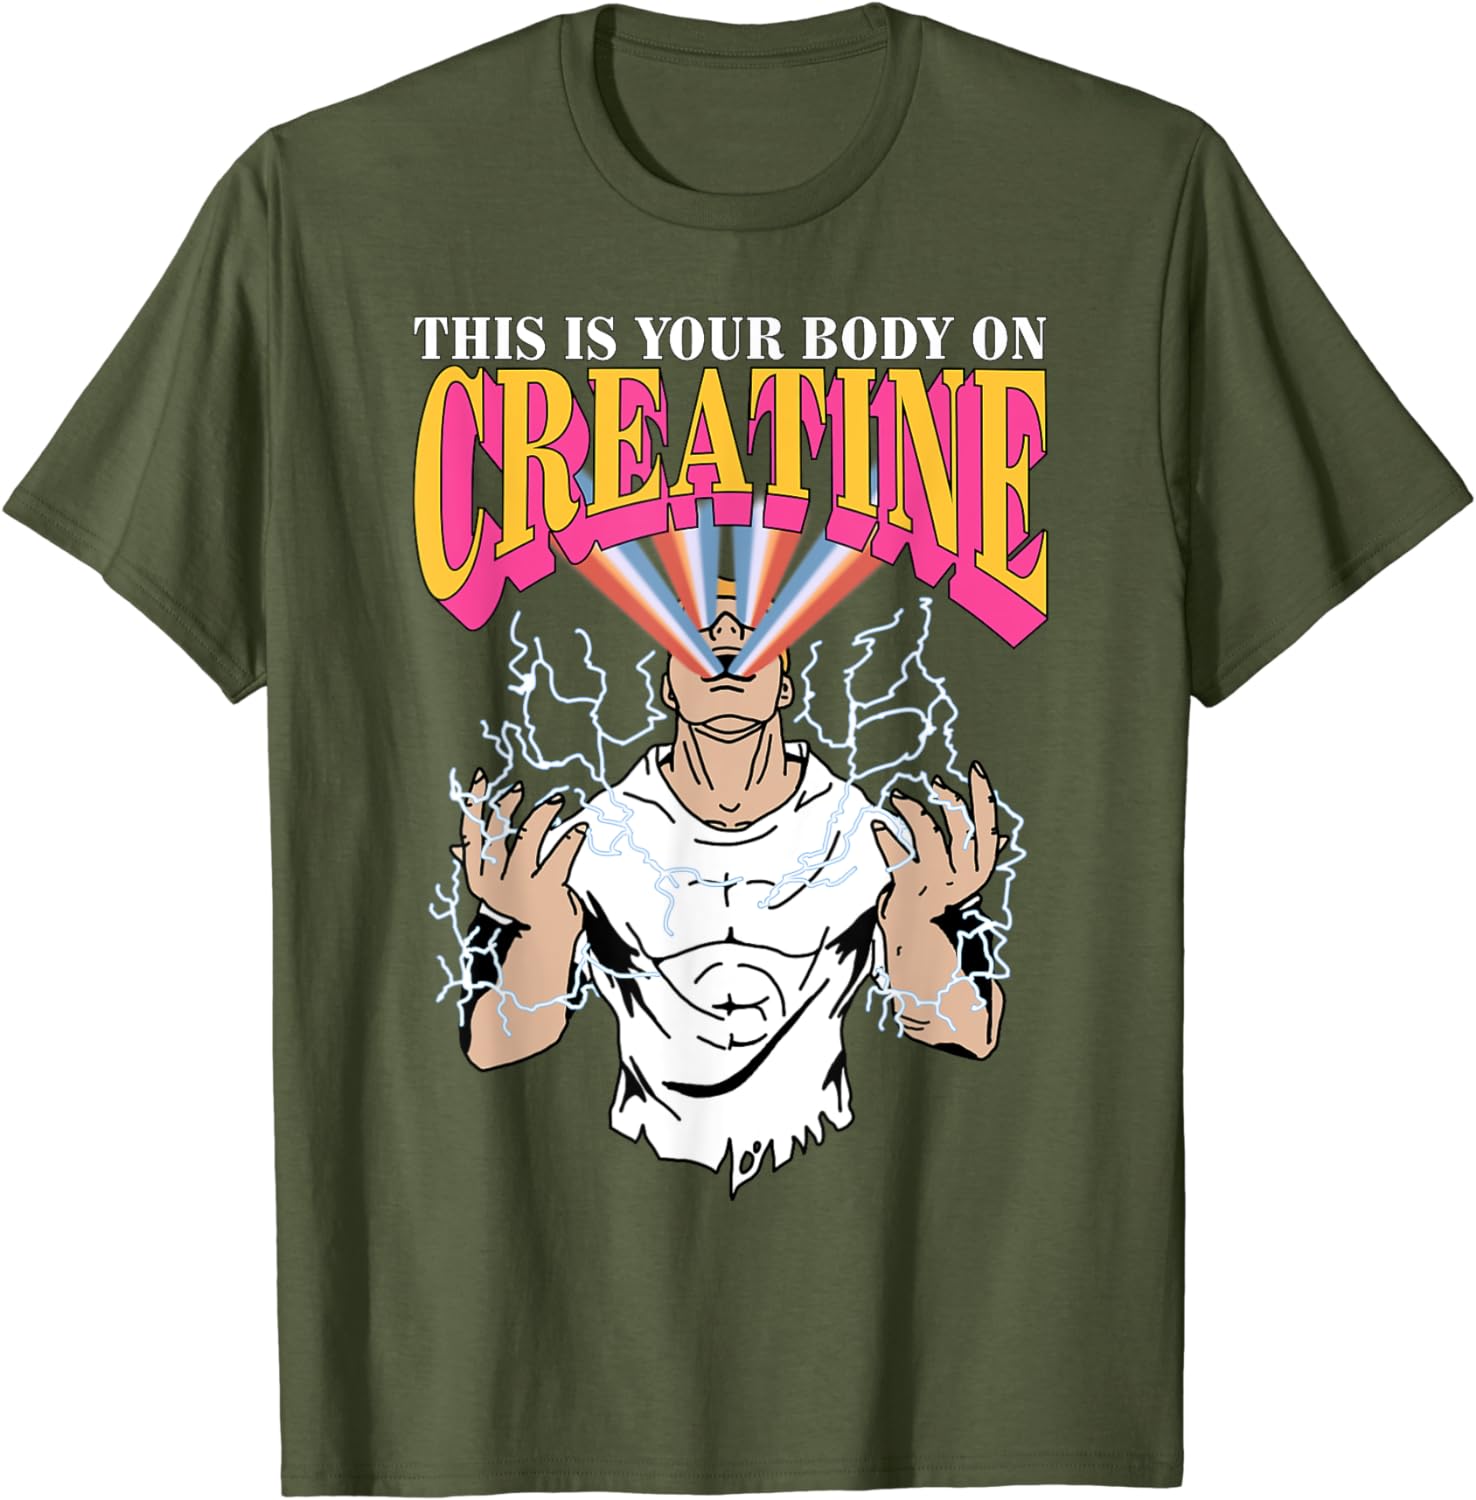 This Is Your Body On Creatine Shirt: Fitness Made Fashionable